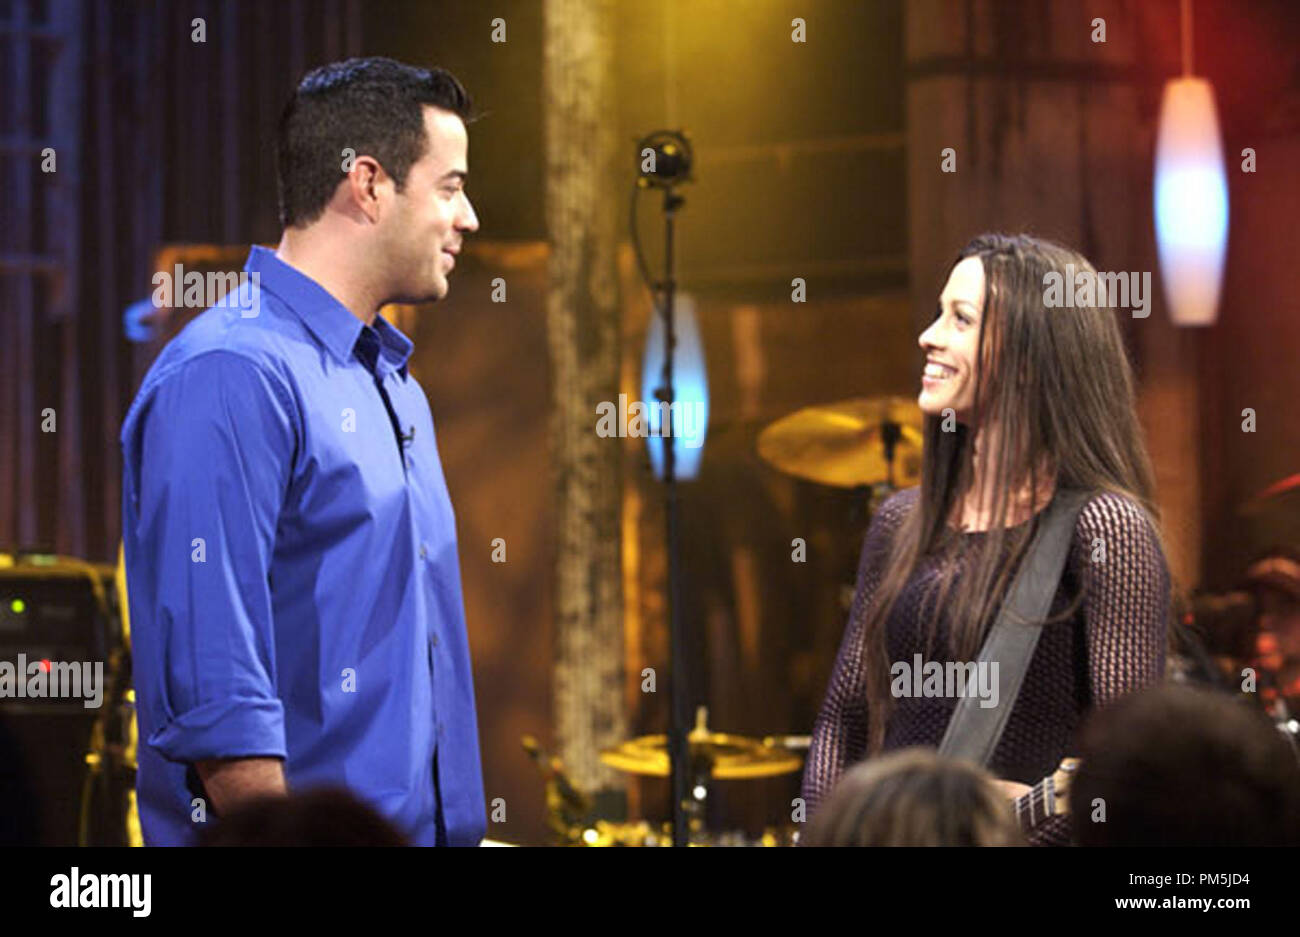 Film Still / Publicity Still from 'Last Call With Carson Daly' Carson Daly, Alanis Morissette February 26, 2002 Photo Credit: Theo Wargo File Reference # 30754629THA  For Editorial Use Only -  All Rights Reserved Stock Photo